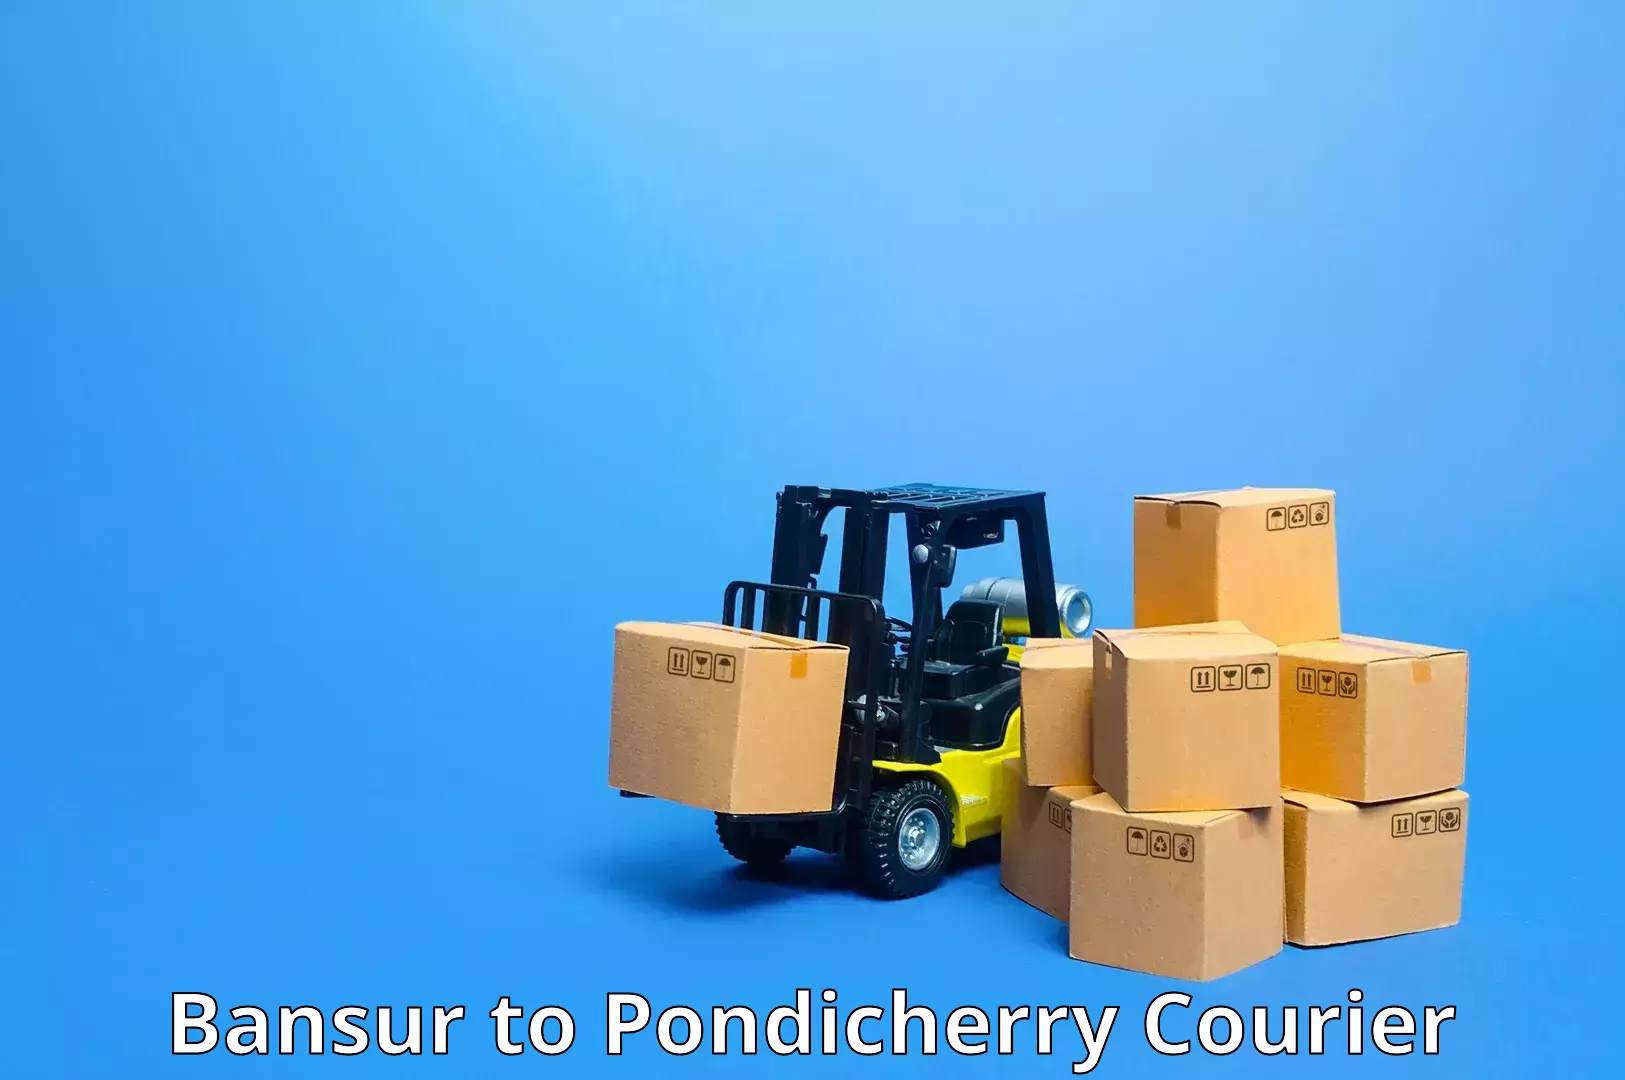 State-of-the-art courier technology Bansur to Pondicherry University